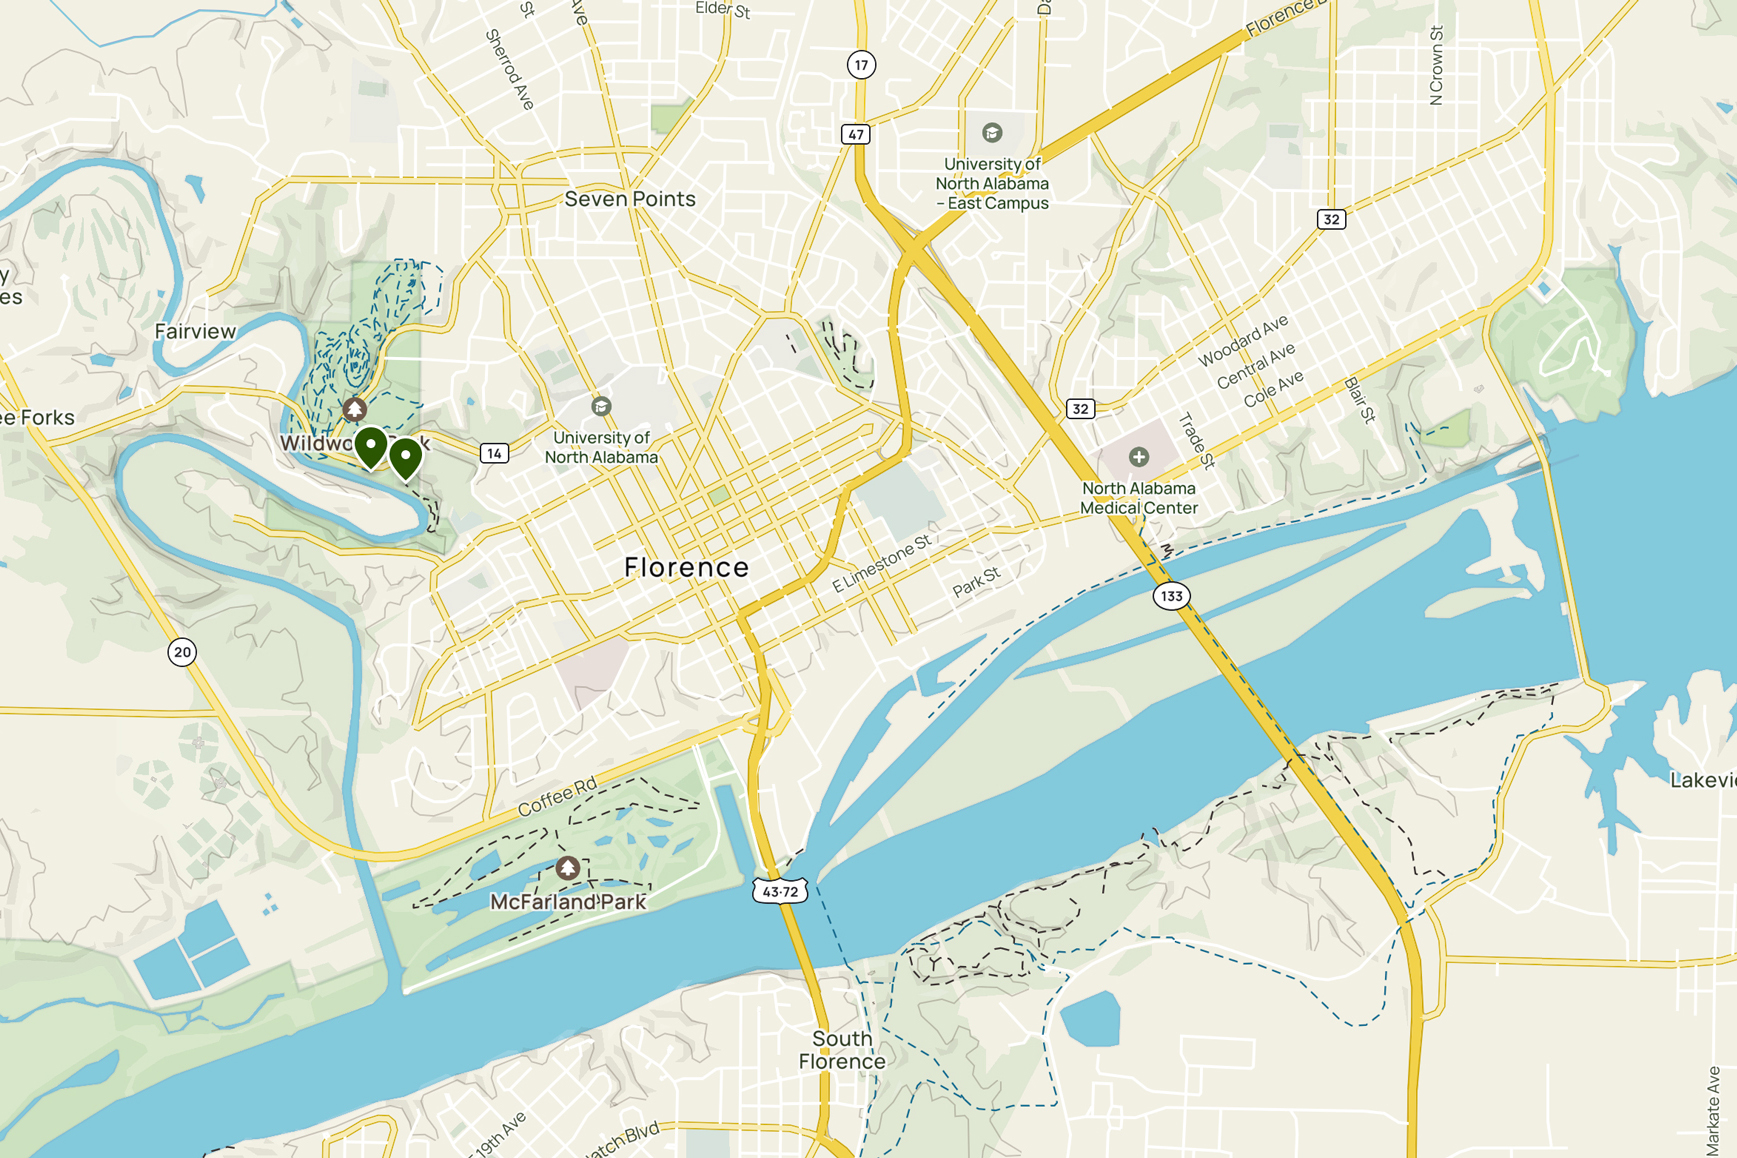 A map of the Florence, Alabama, area, focused on Wildwood Park. Screenshot taken from AllTrails.